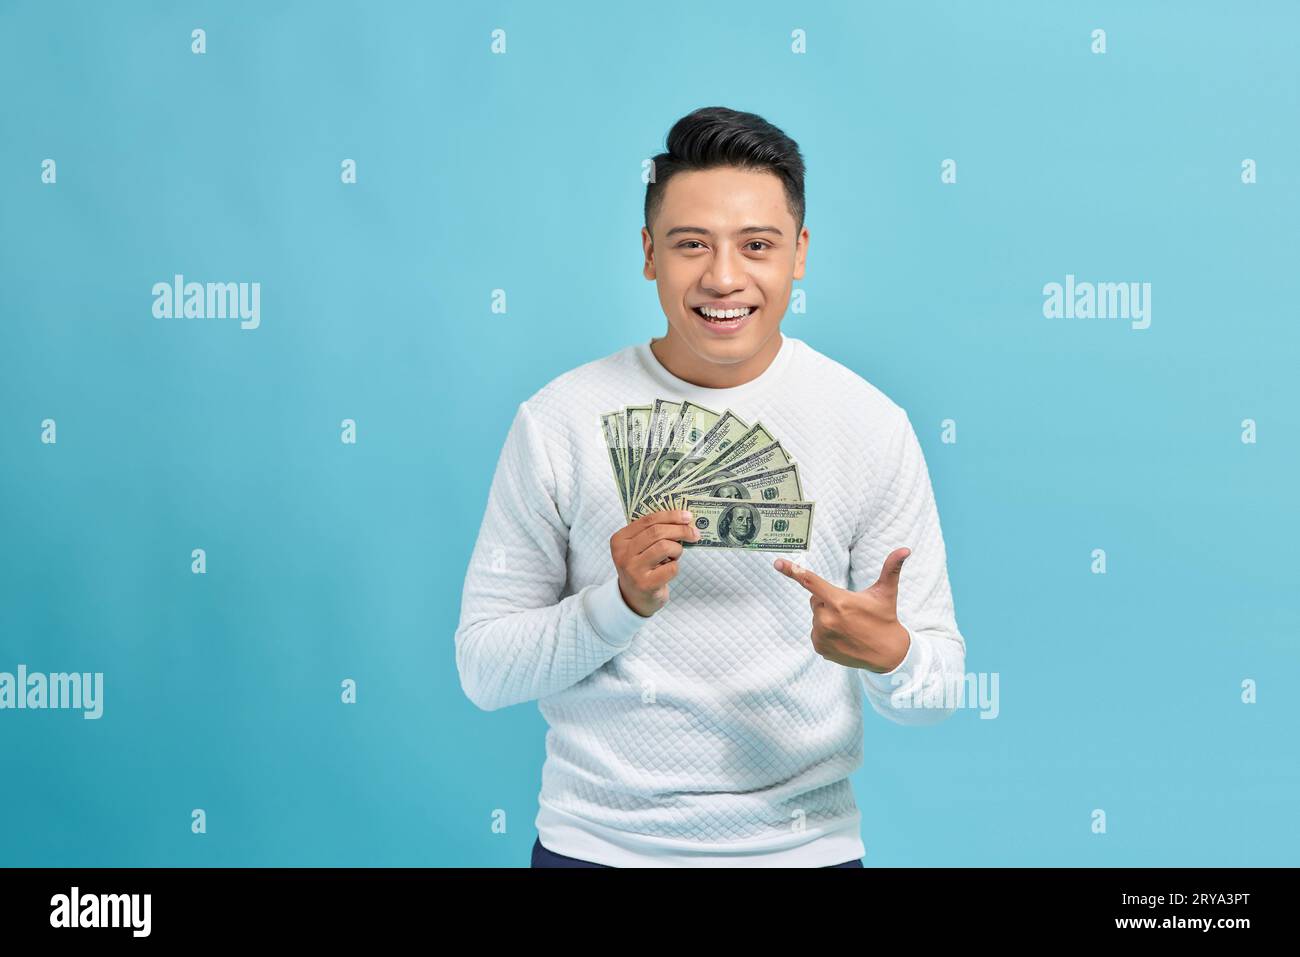 happy man with money fan, standing isolated against blue background Stock Photo